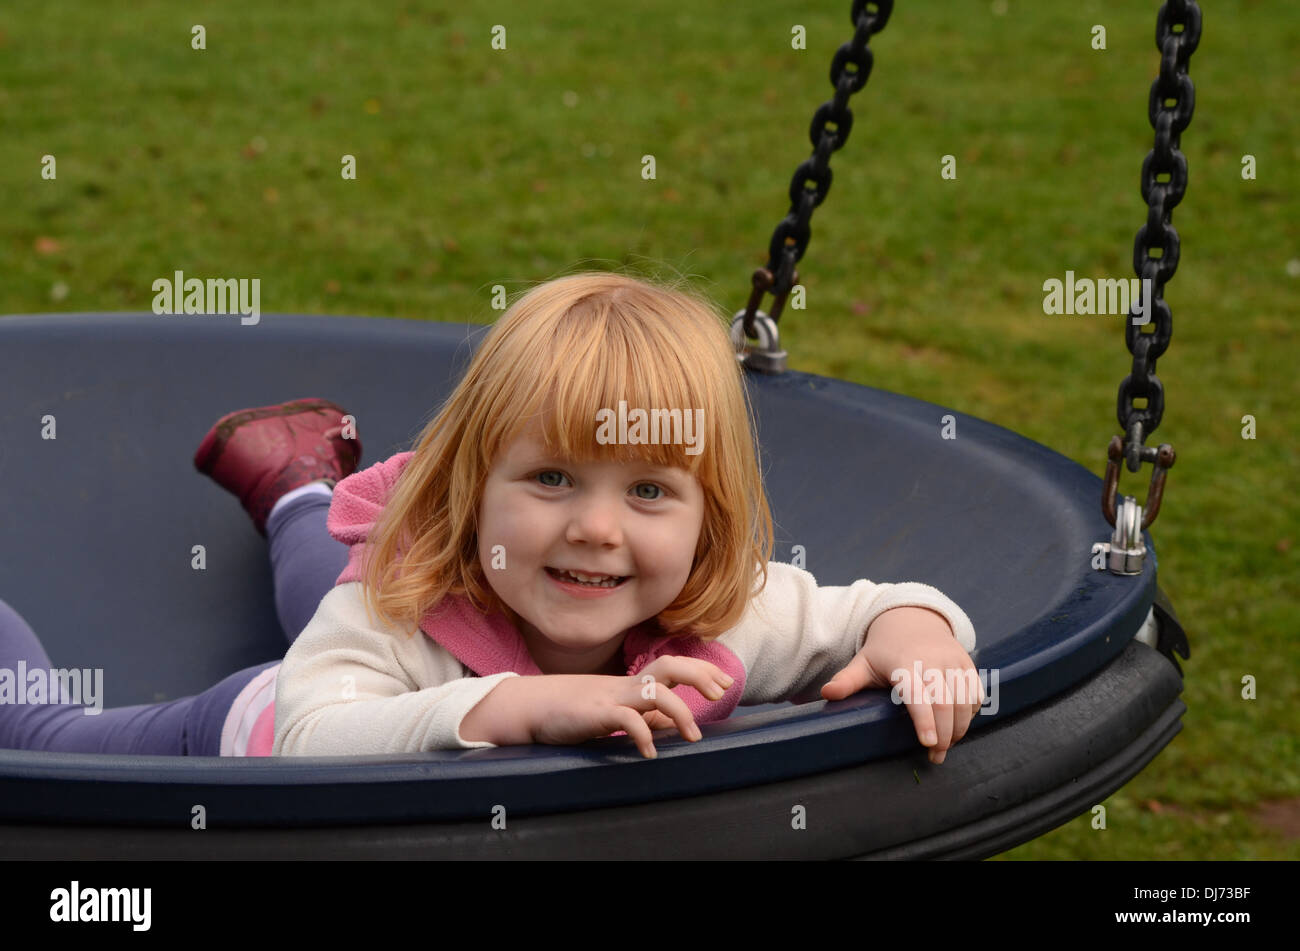 3 year old girl on a swing Stock Photo